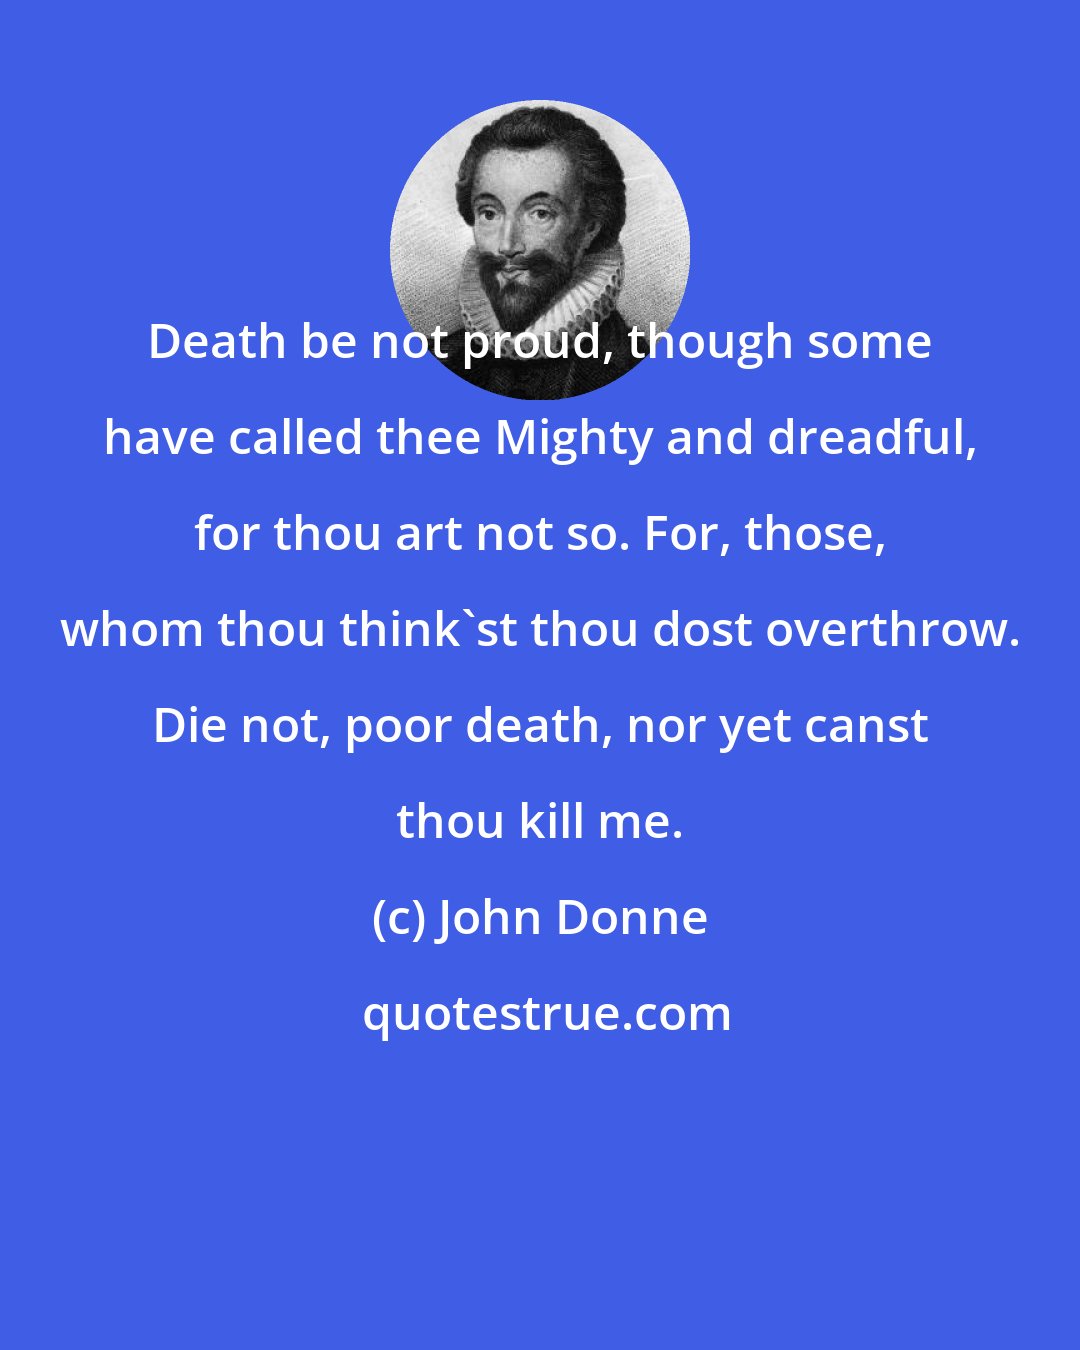 John Donne: Death be not proud, though some have called thee Mighty and dreadful, for thou art not so. For, those, whom thou think'st thou dost overthrow. Die not, poor death, nor yet canst thou kill me.